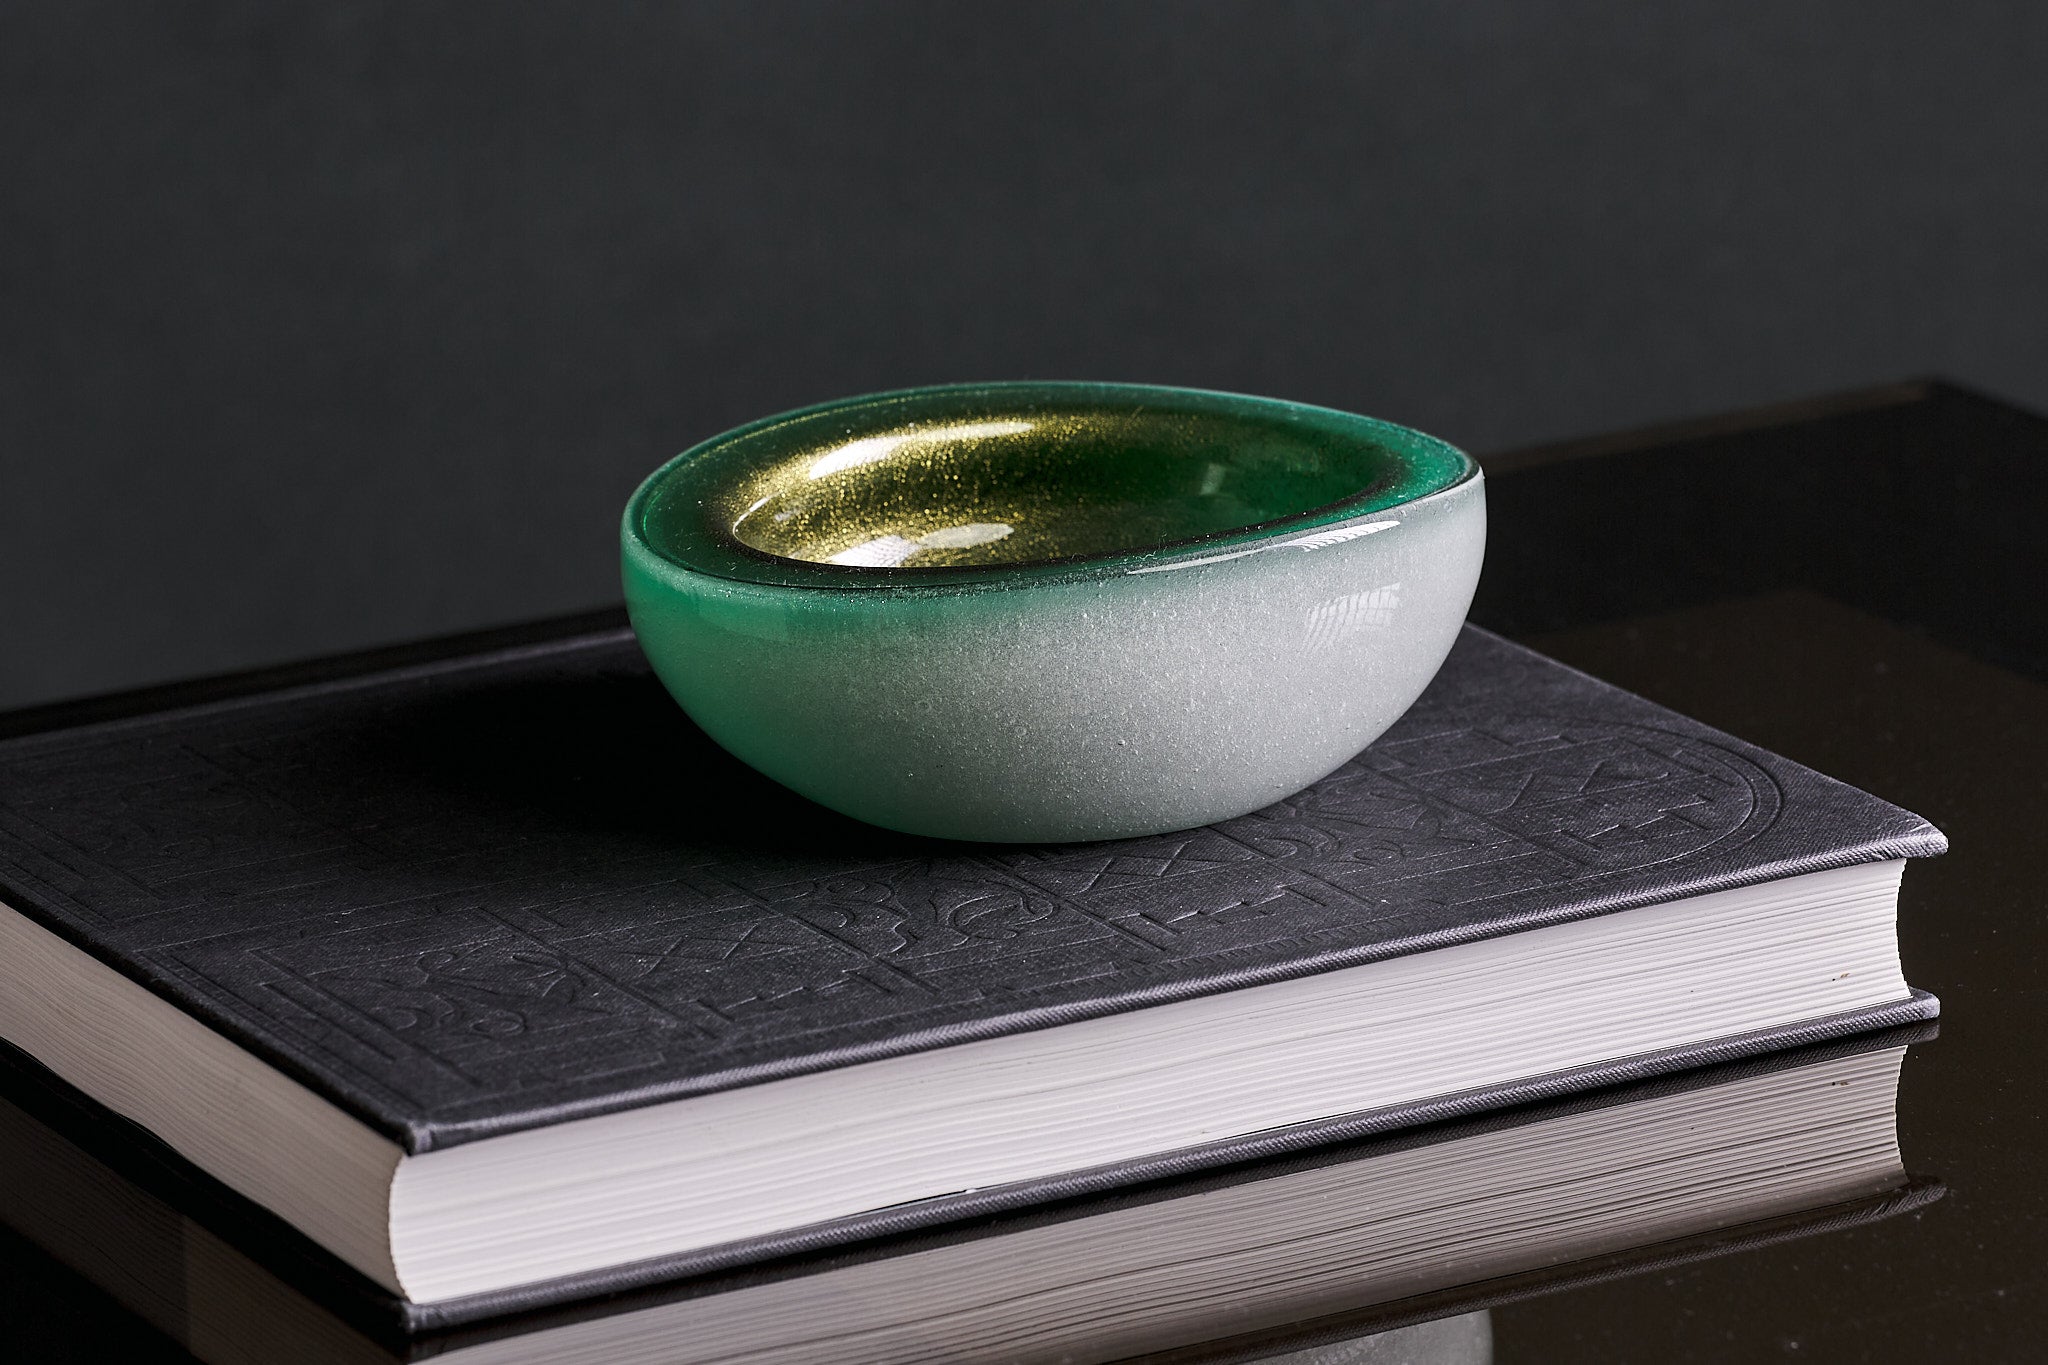 Vintage Italian Murano blown glass bowl Mid-century style in a deep emerald green with gold flecks